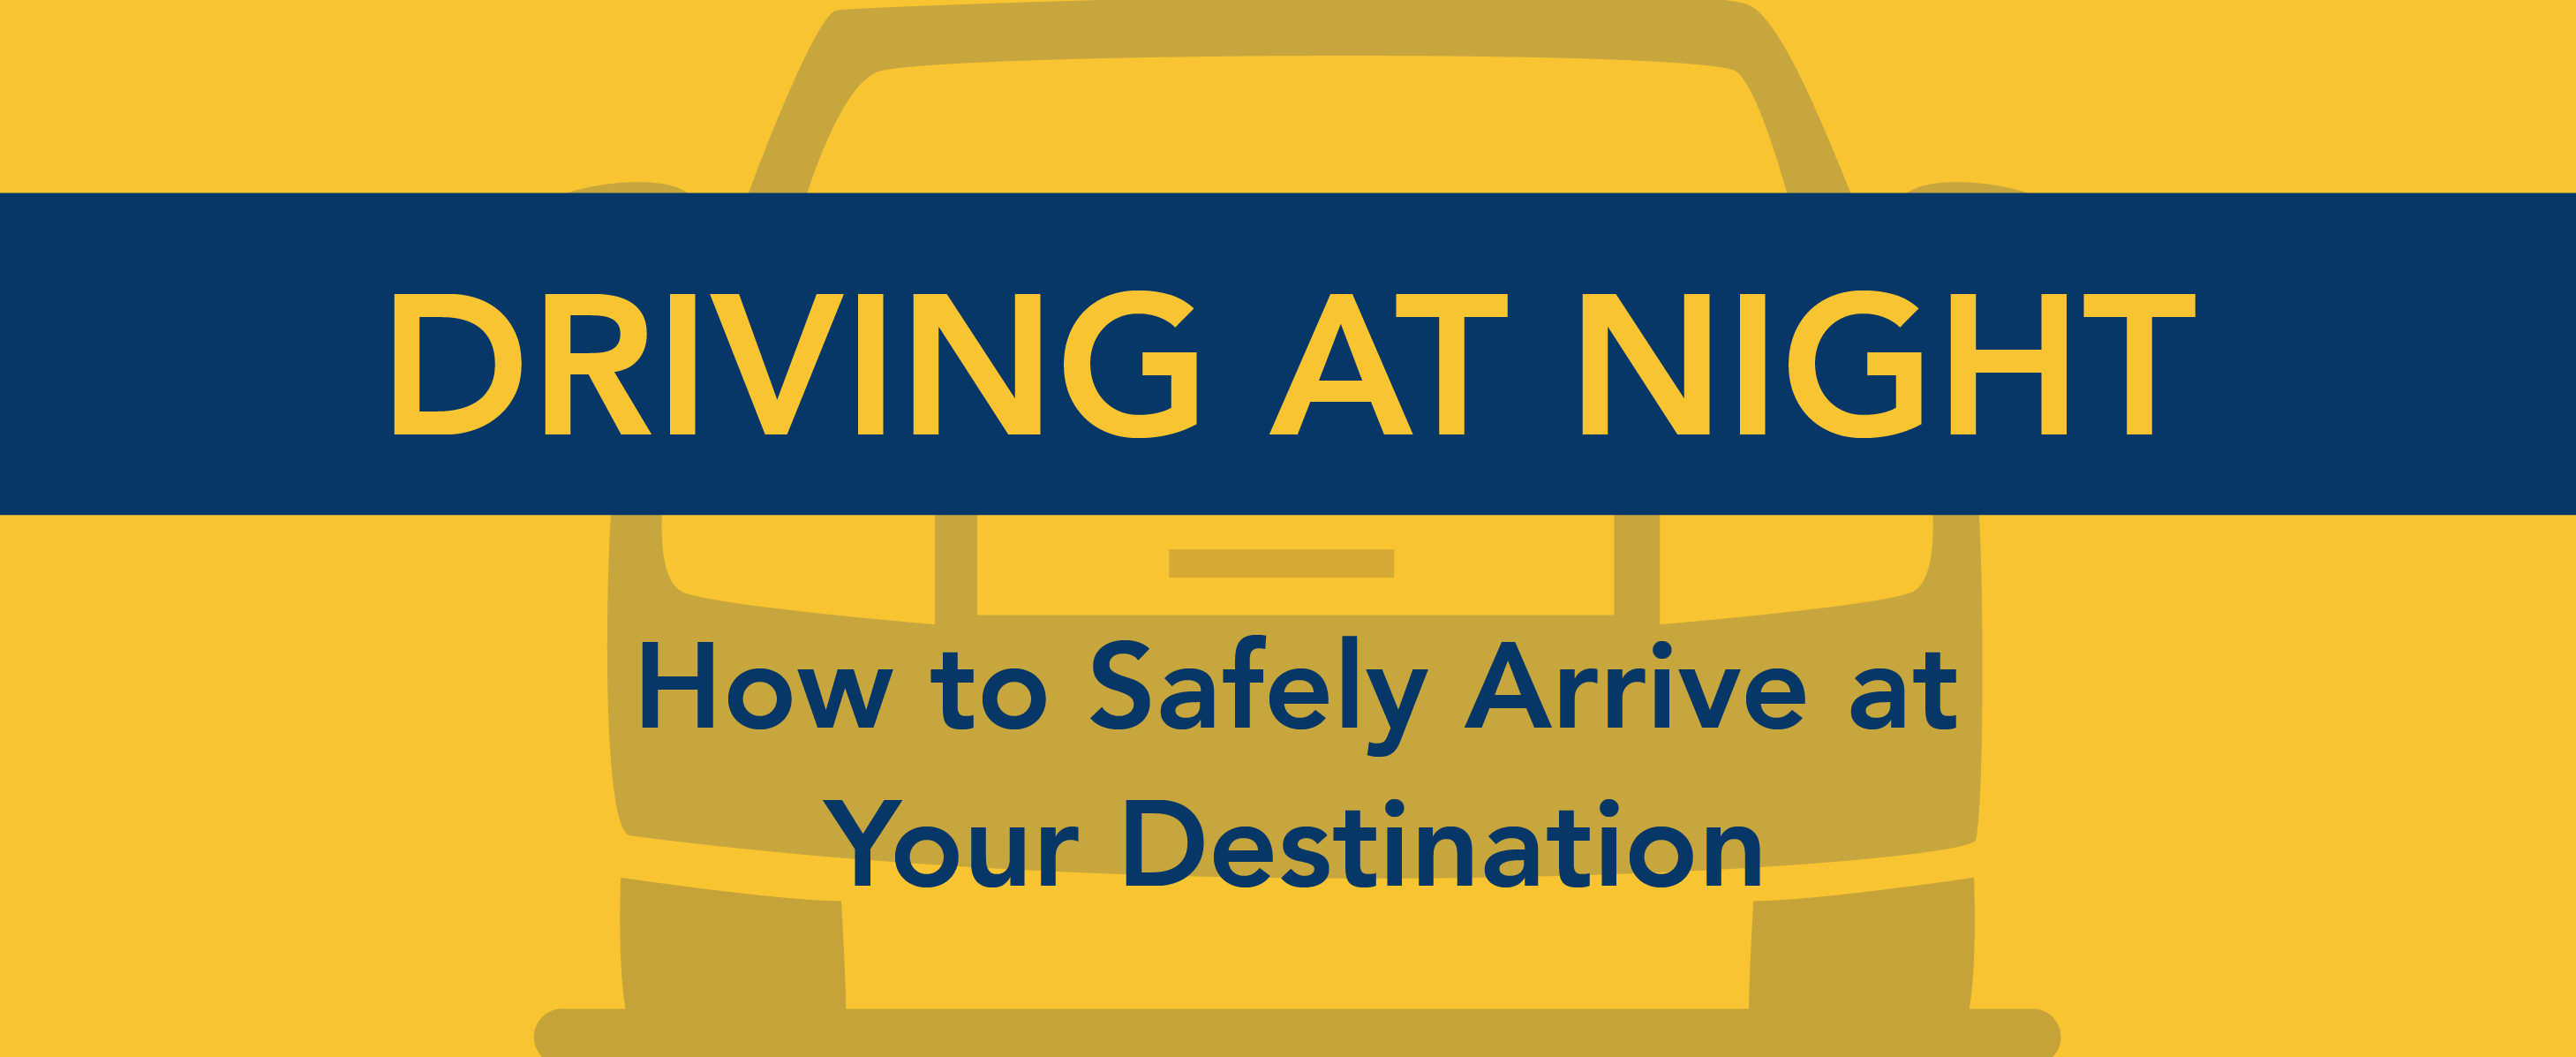 Driving at Night: How to safely arrive at your destination.